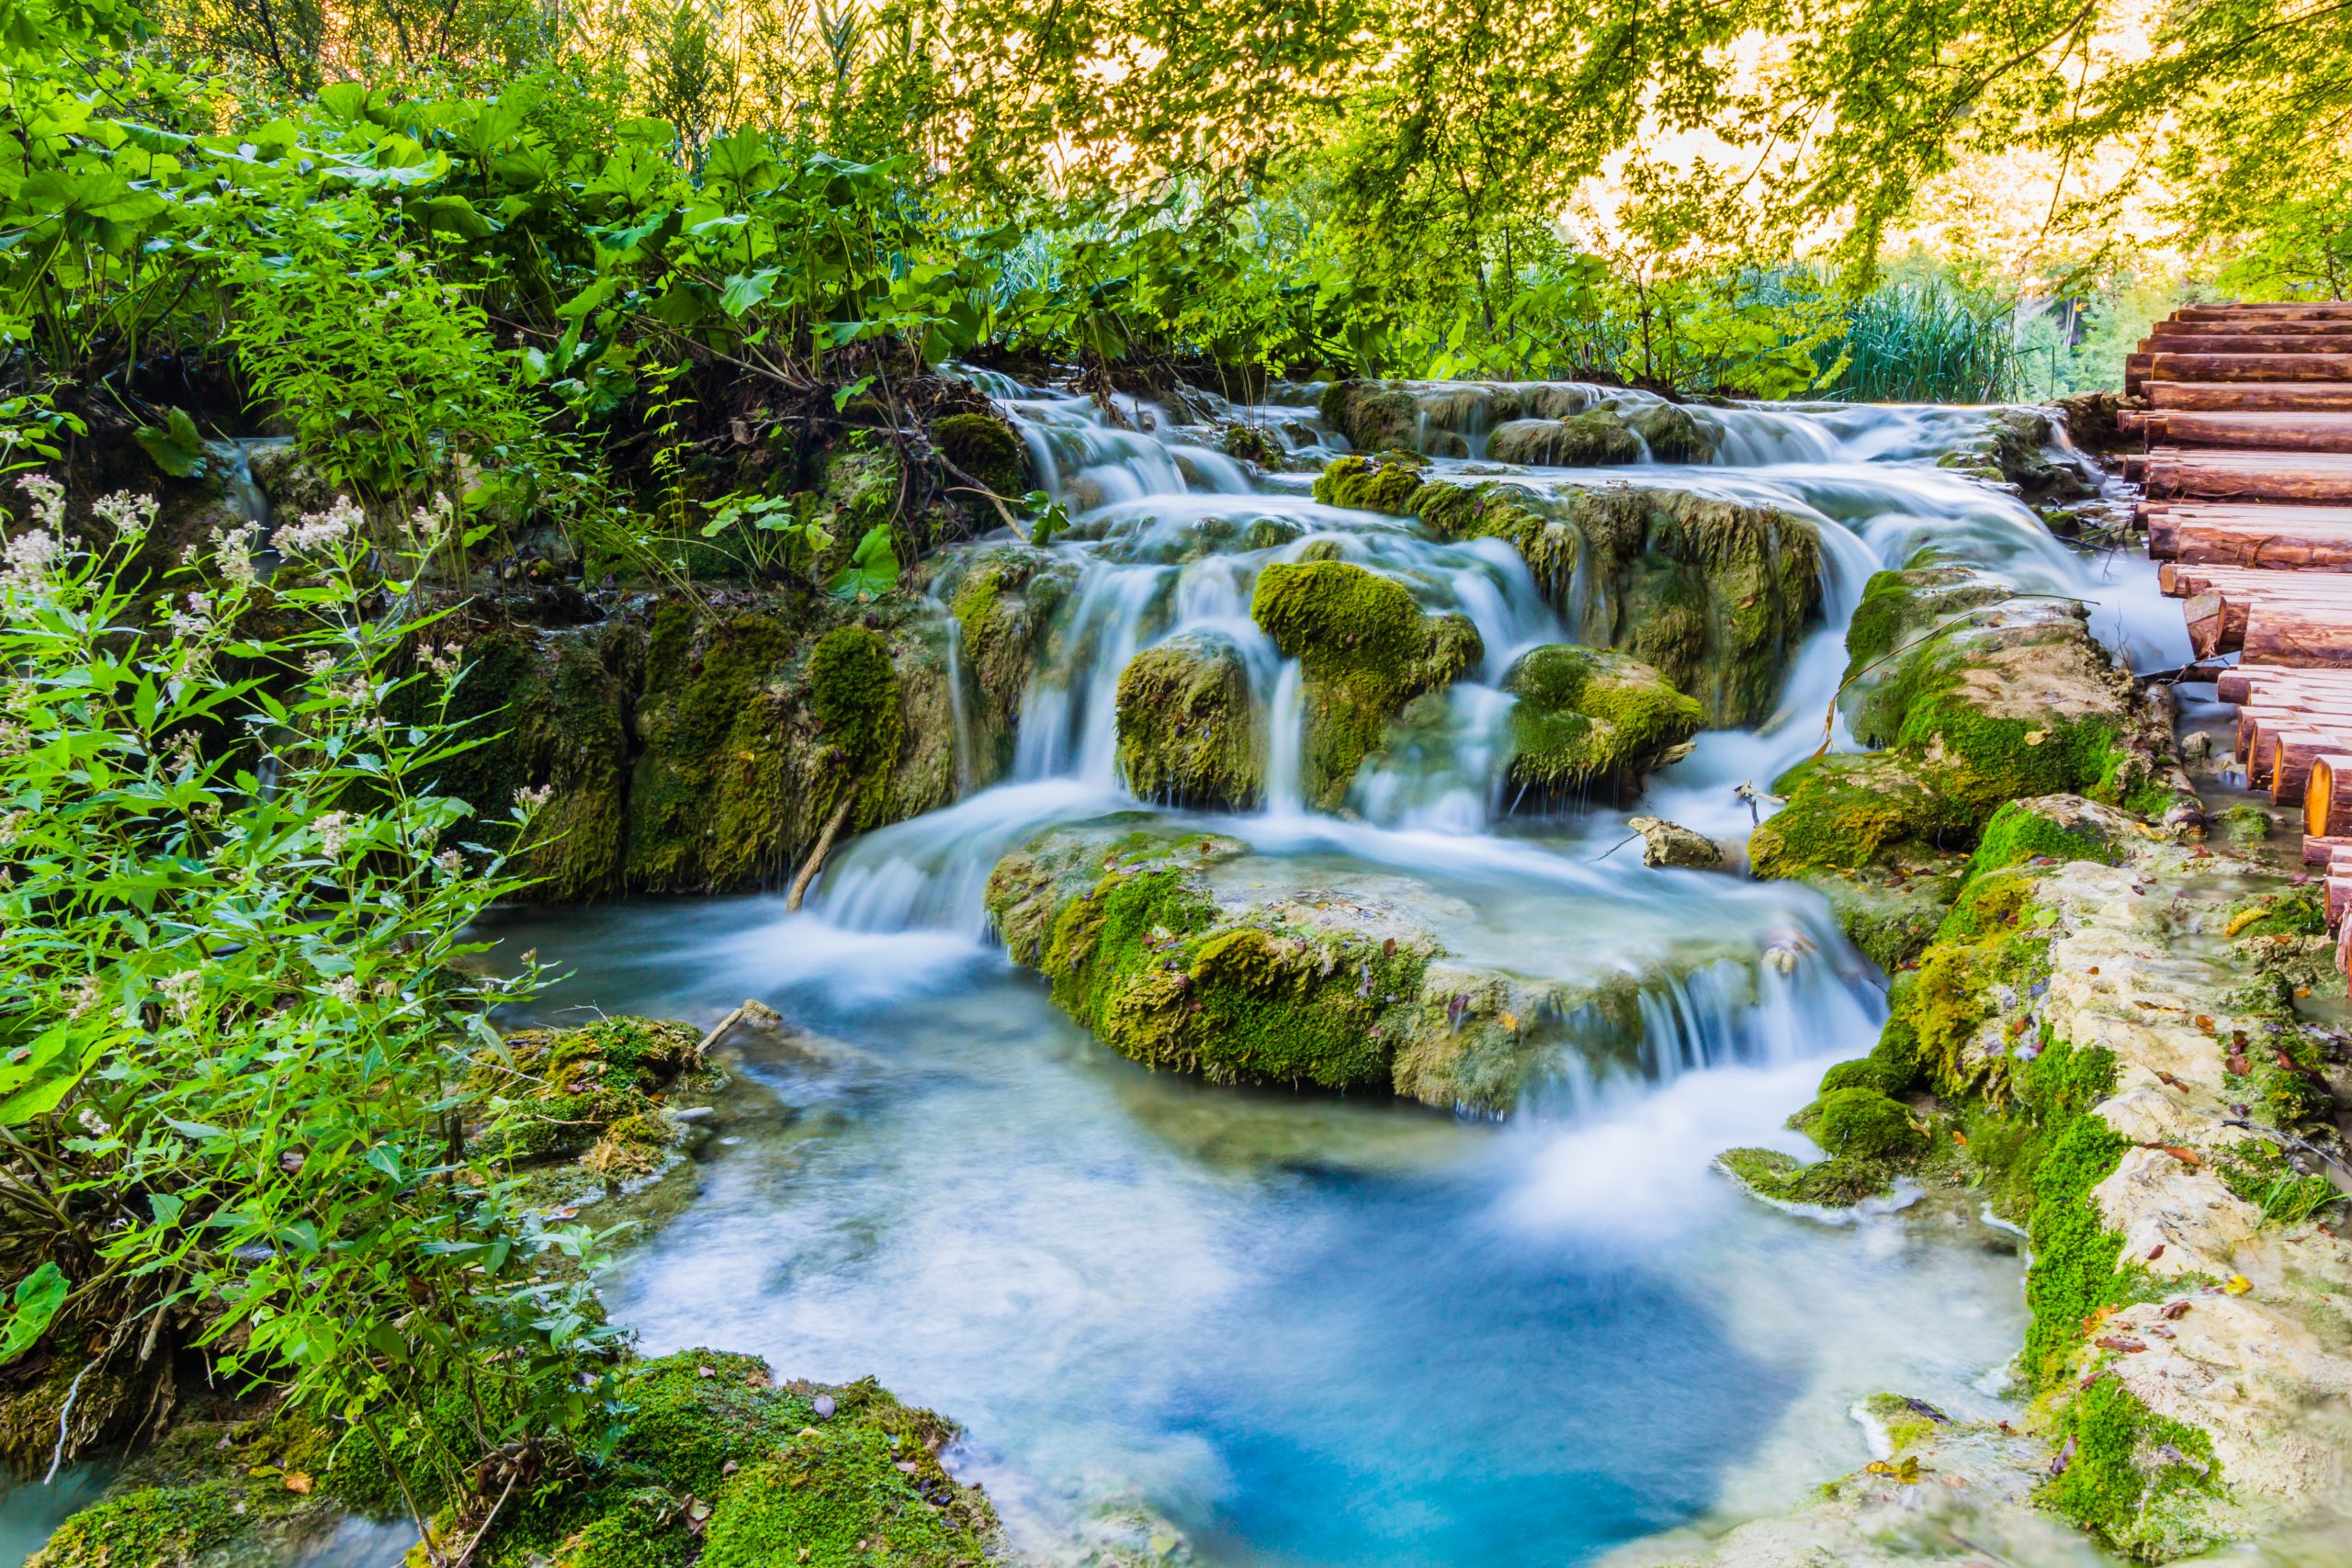 Explore The Stunning Waterfalls On The Plitvice National Park Day Tour